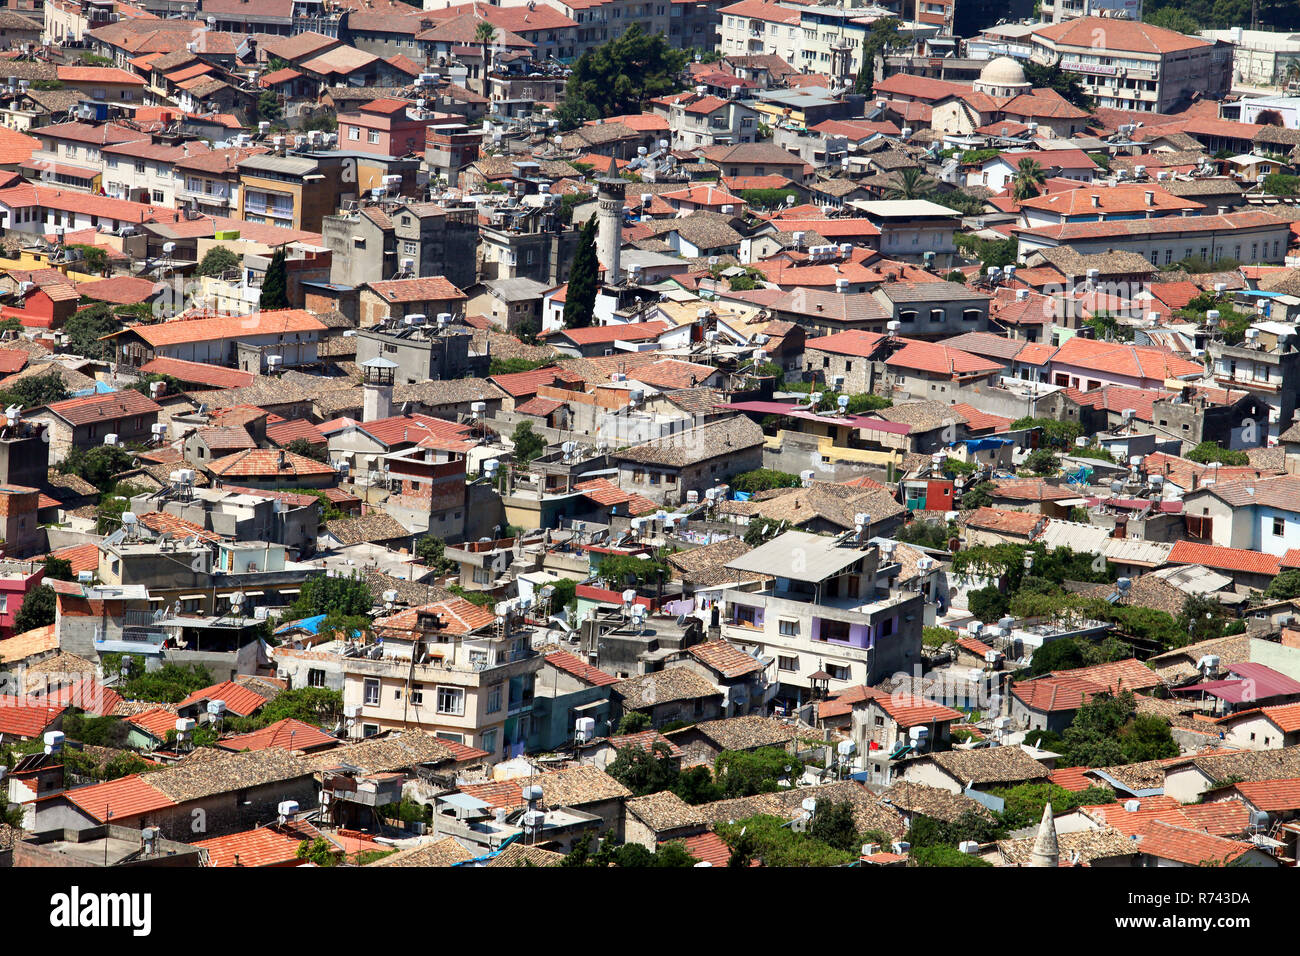 View of Hatay City (Antakya) in Turkey. Hatay, the third biggest city of the Roman Empire, is one of the most important tourism destinations in Turkey Stock Photo